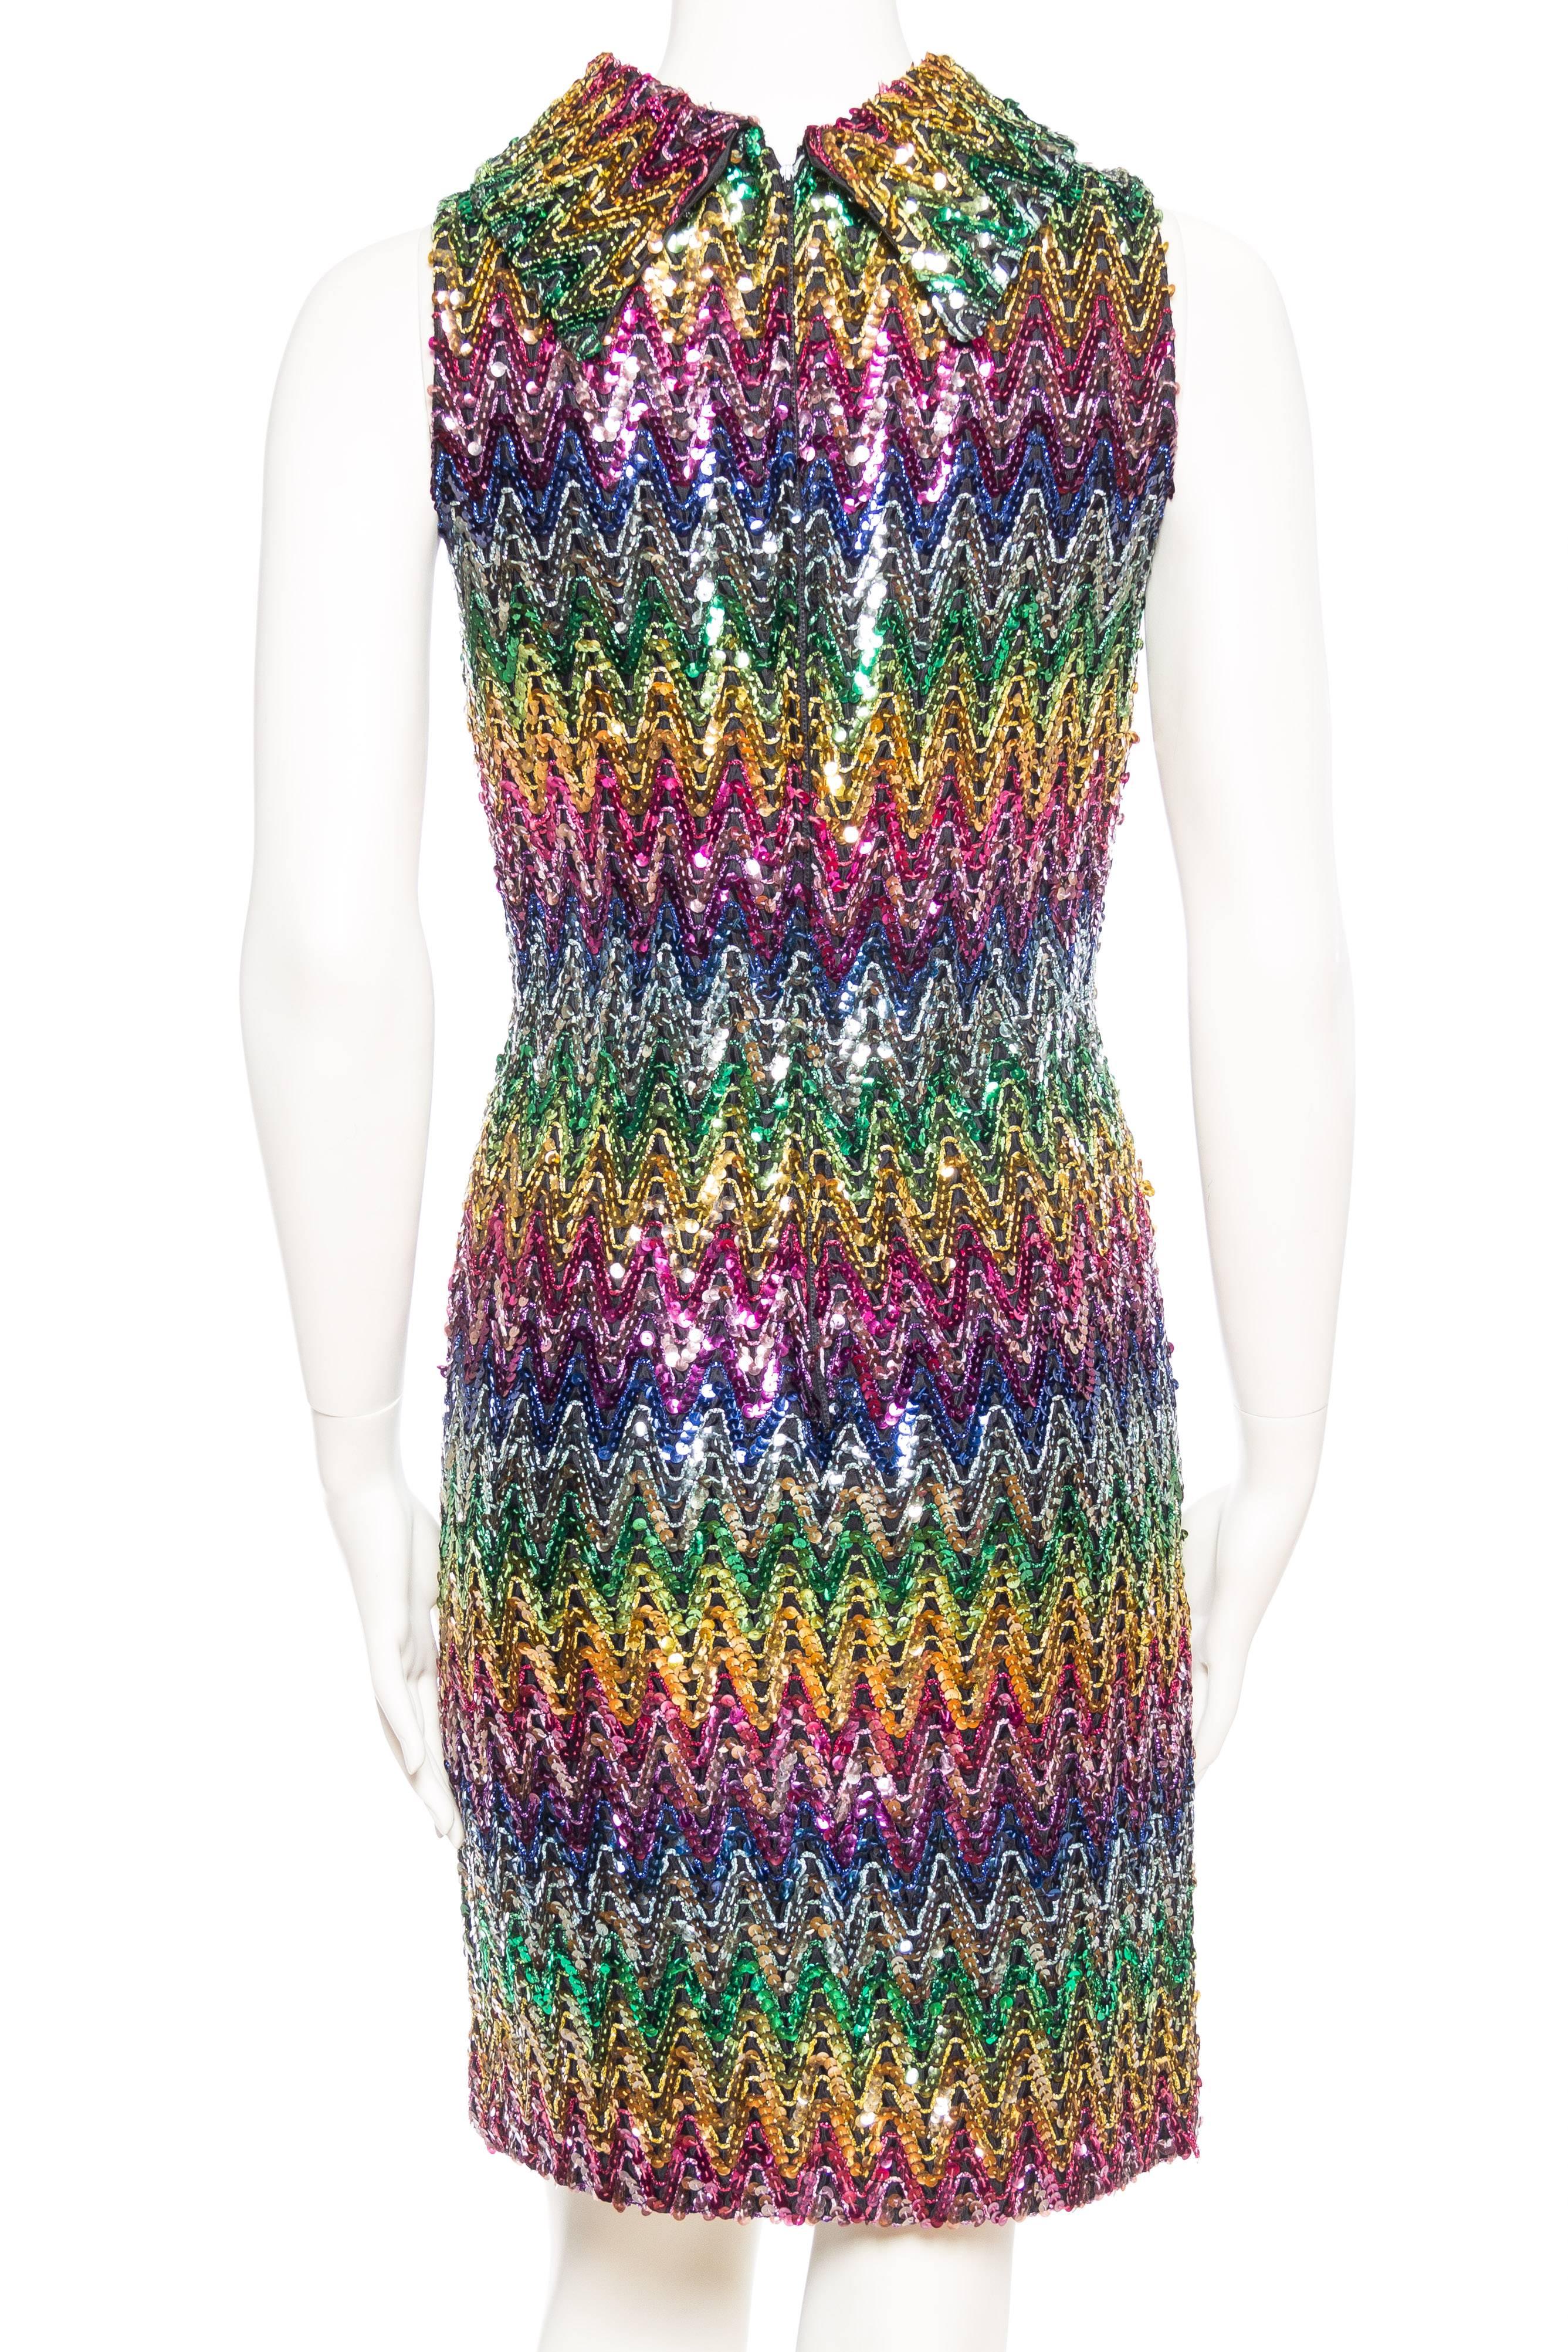 1960s Disco Rainbow Sequined Dress from Magnin 2